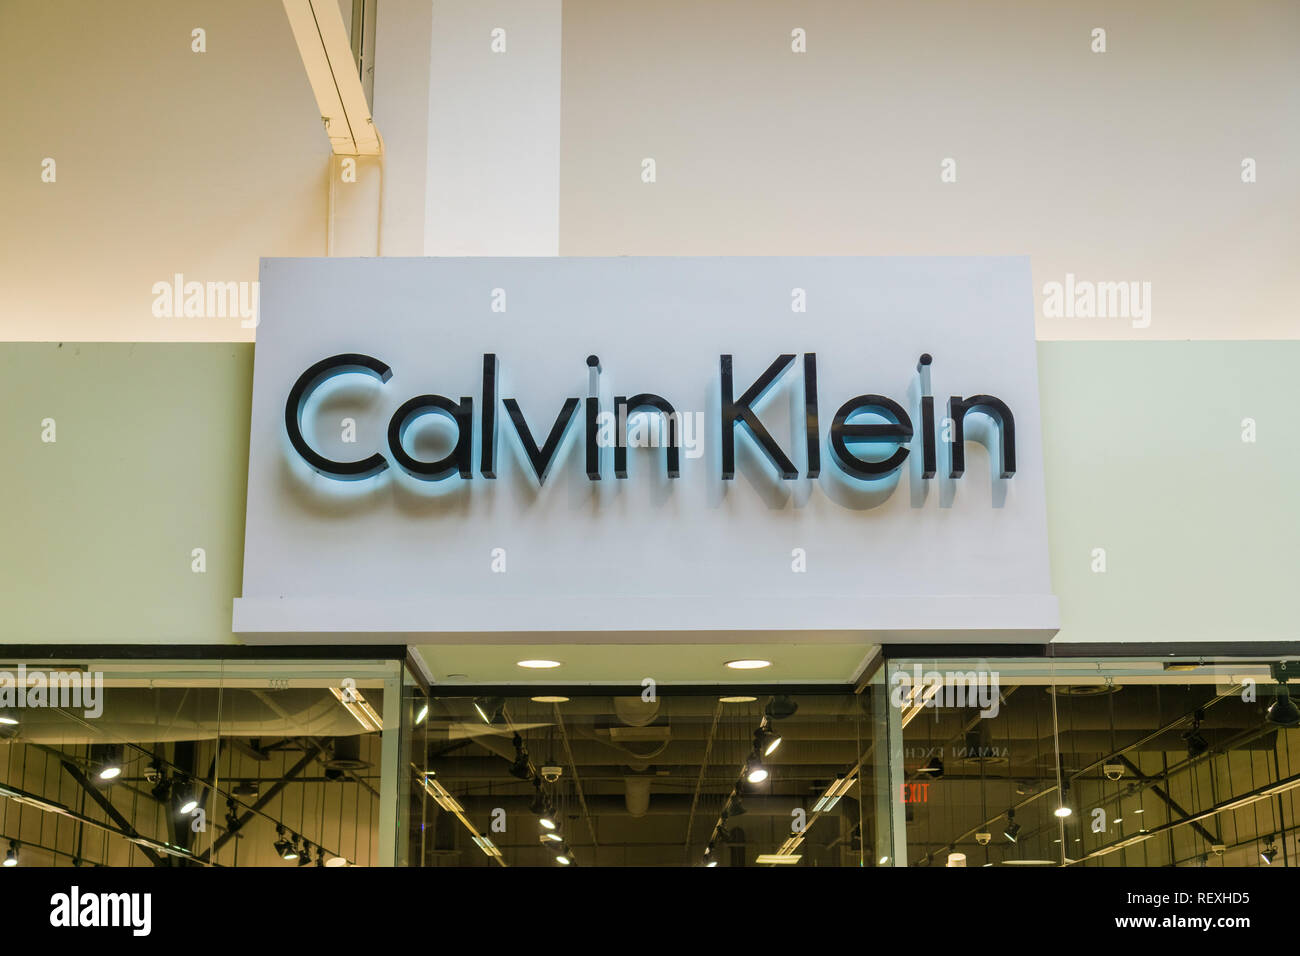 August 4, 2017 Milpitas/CA/USA - Calvin Klein logo above the storefront located at Great Mall, San Francisco bay area Stock Photo